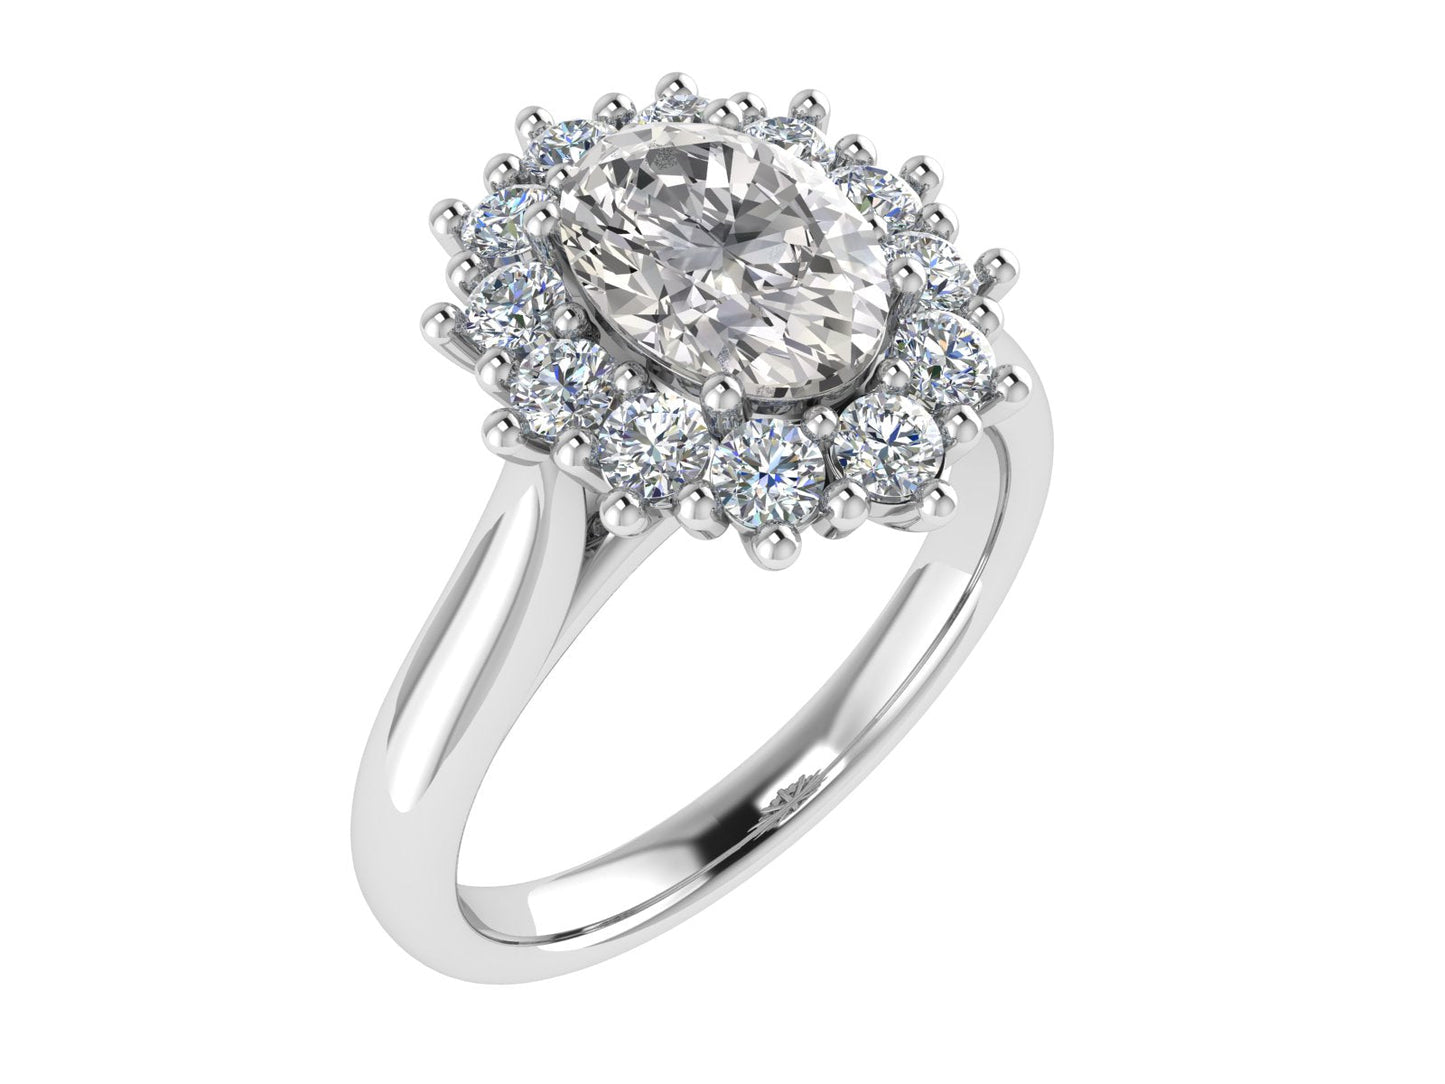 Oval Diamond Cluster Ring 9 x 7mm